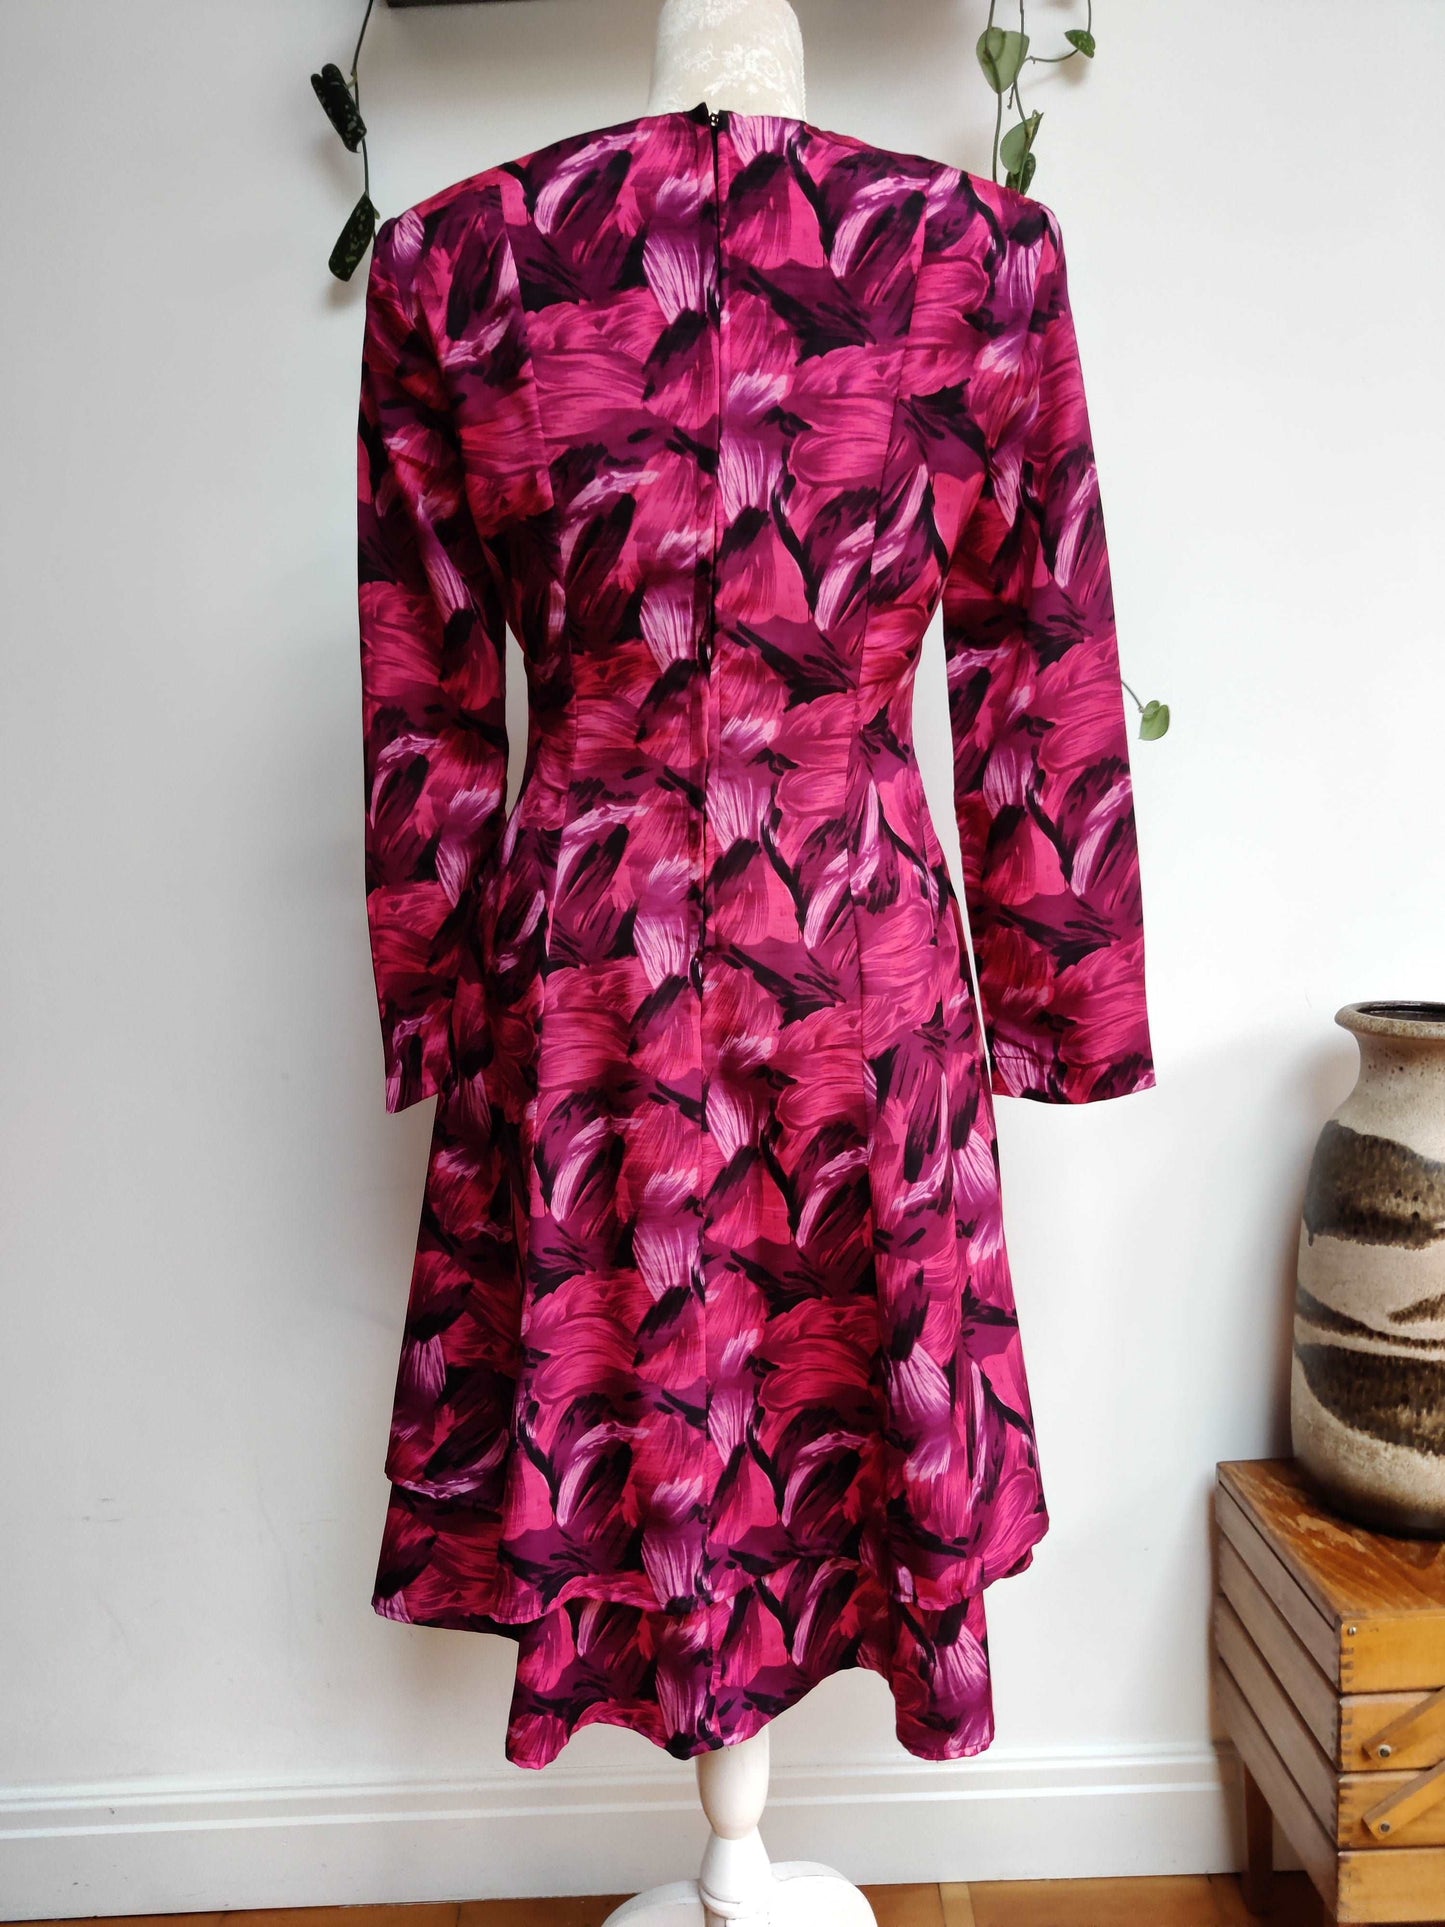 Beautiful 60s floral dress in vibrant pink. Size 12.